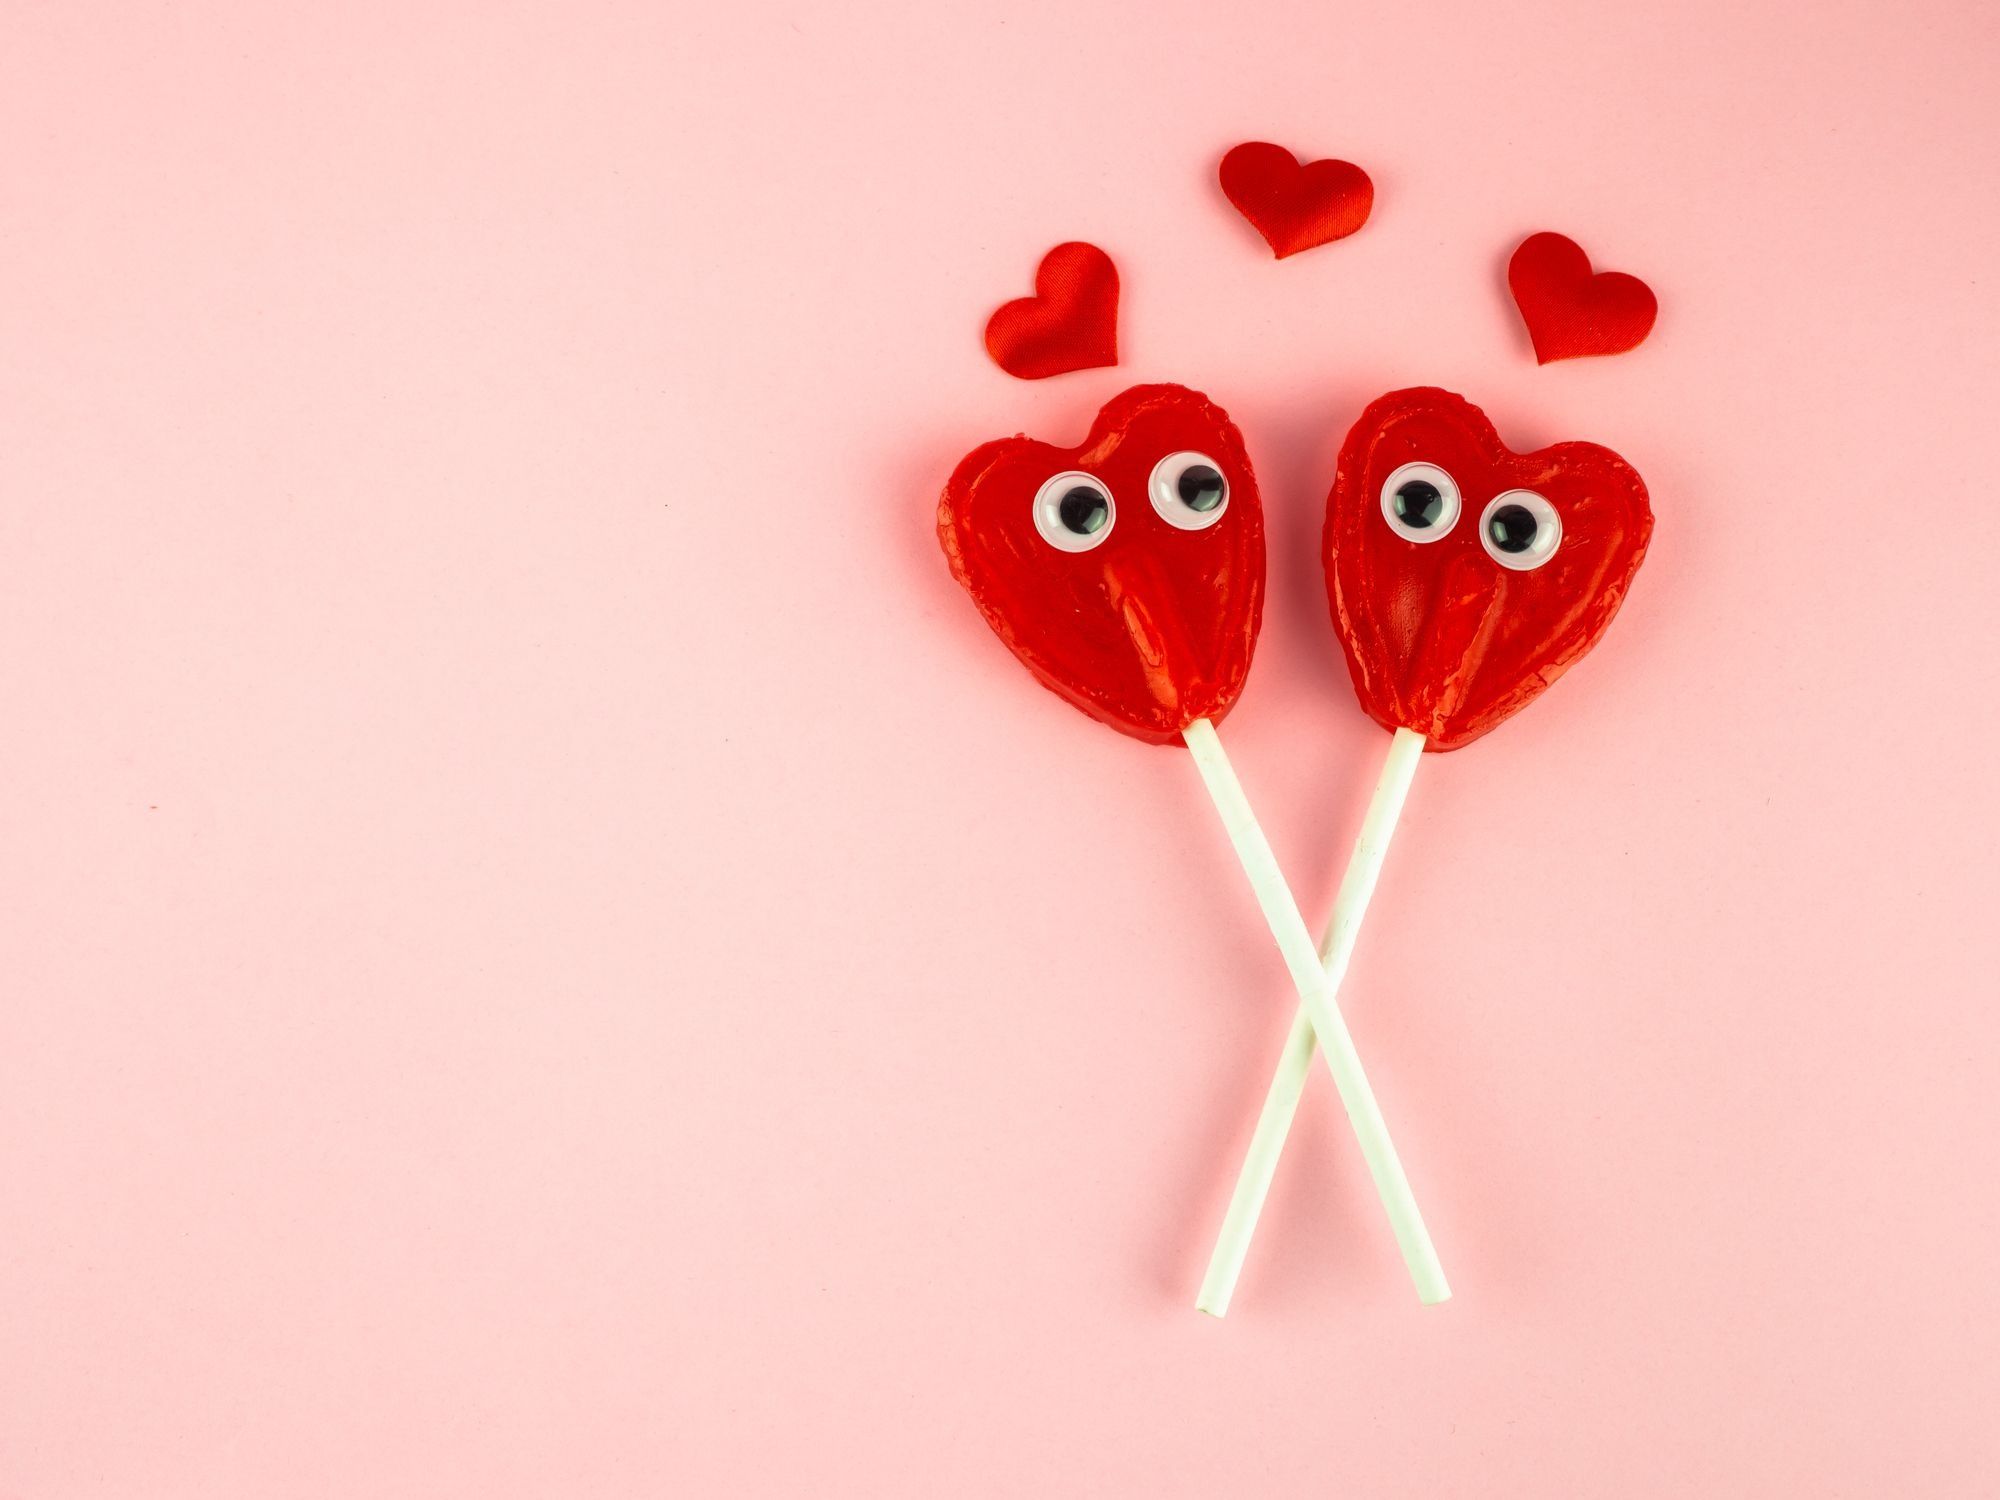 15 Best Valentine's Day Gift Ideas to Give Your Loved One